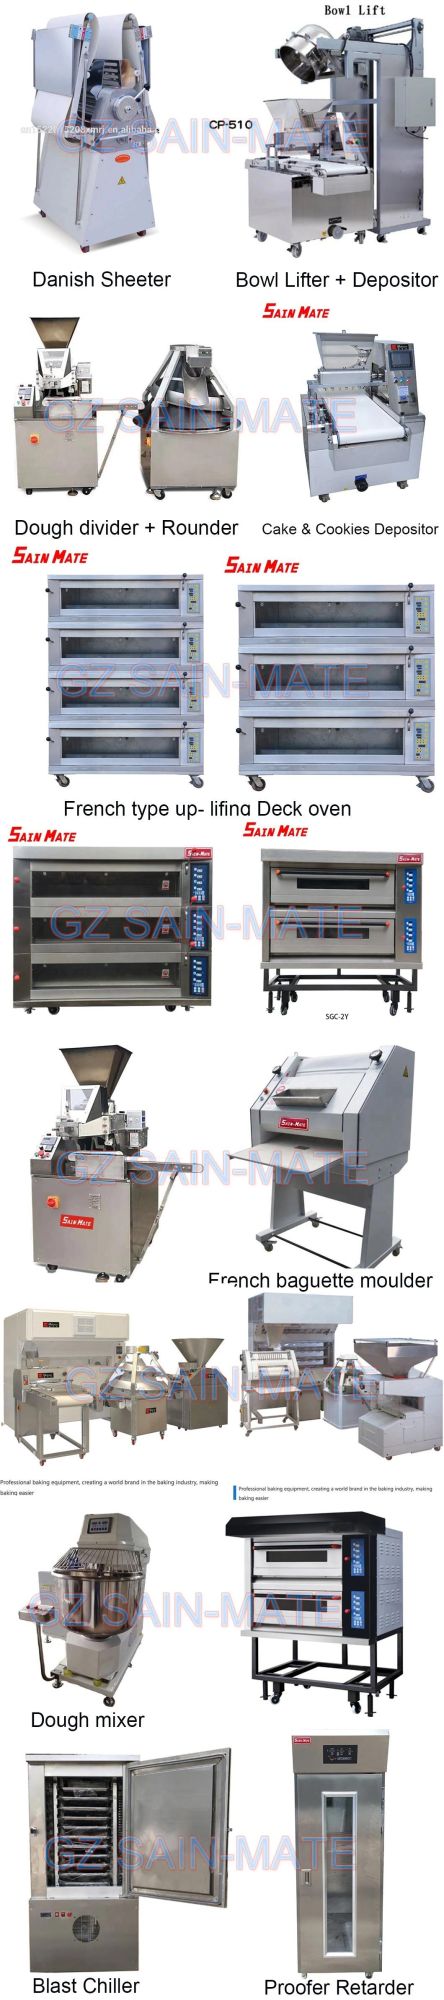 Hot Sale 2019 Baking Cookies Bakery Rotary Rack Ovens for Sale, Cookies Making Oven 64 32 16 Trays Diesel Rotary Rack Oven